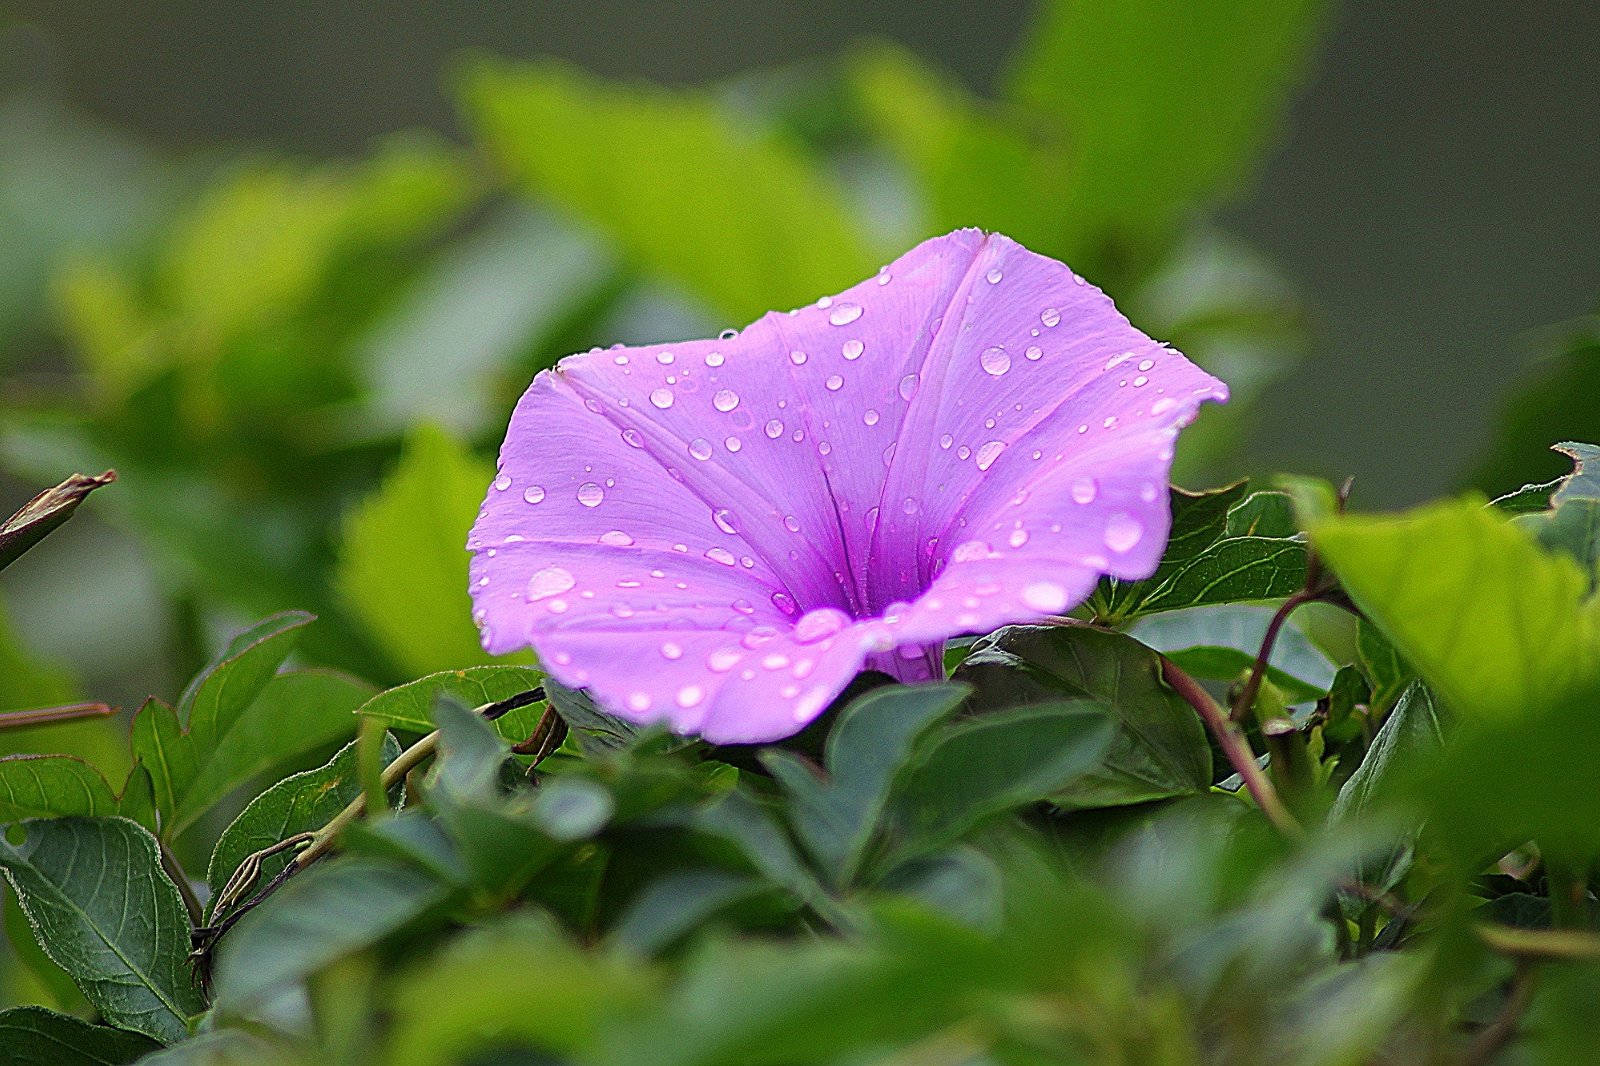 photo of a purple flower with water droplets